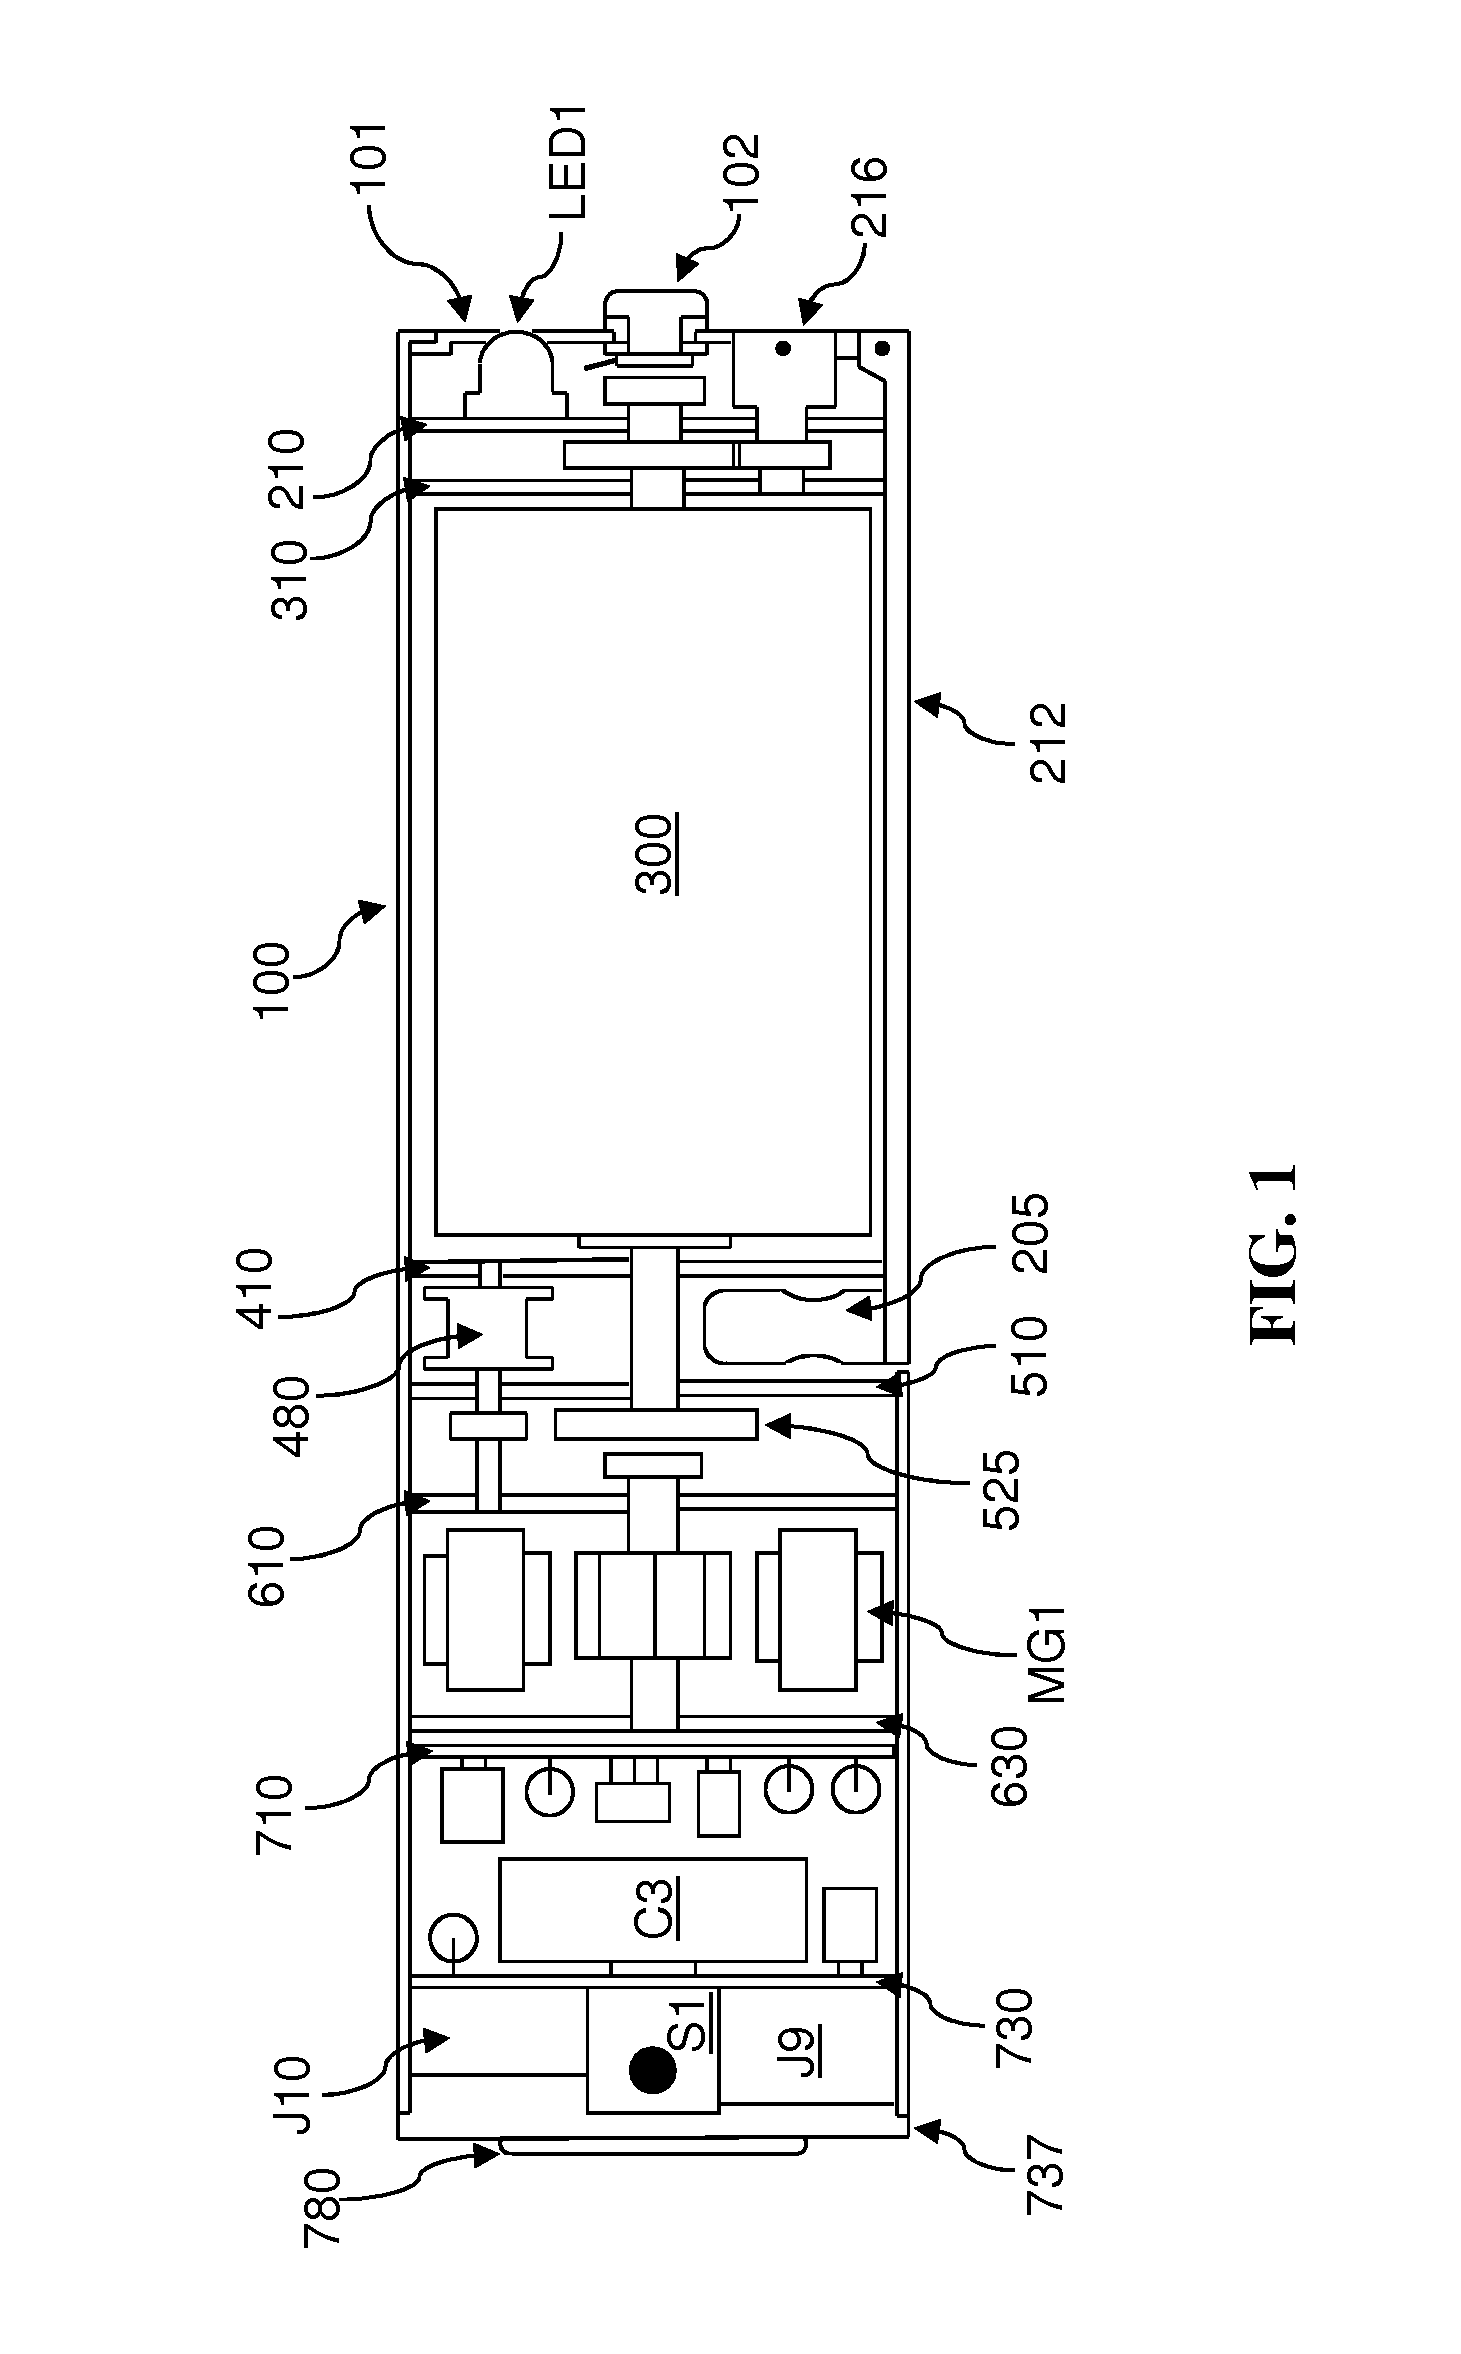 Electro-mechanical dynamo for c and d battery replacement